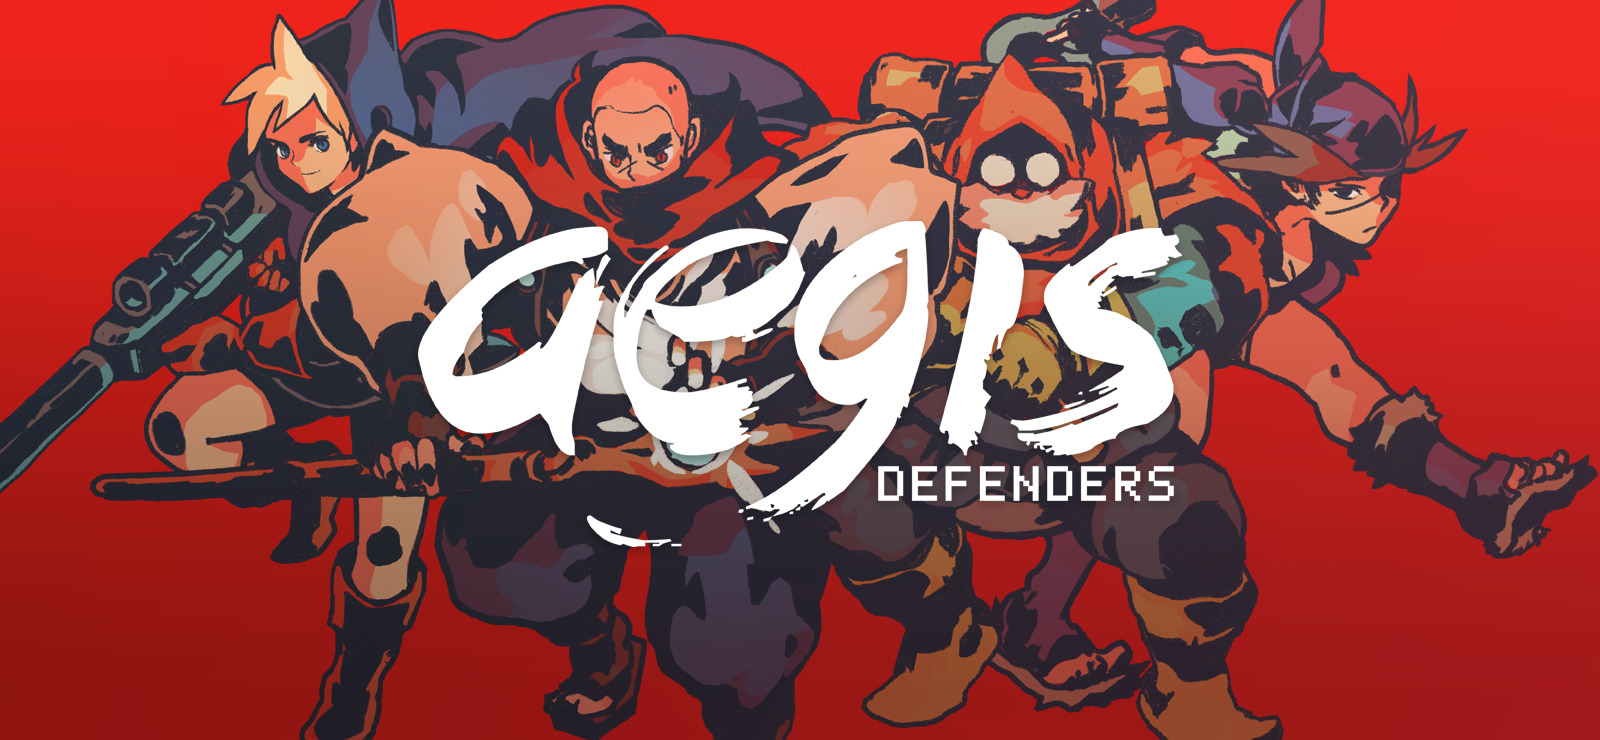 free Aegis Descent for iphone download